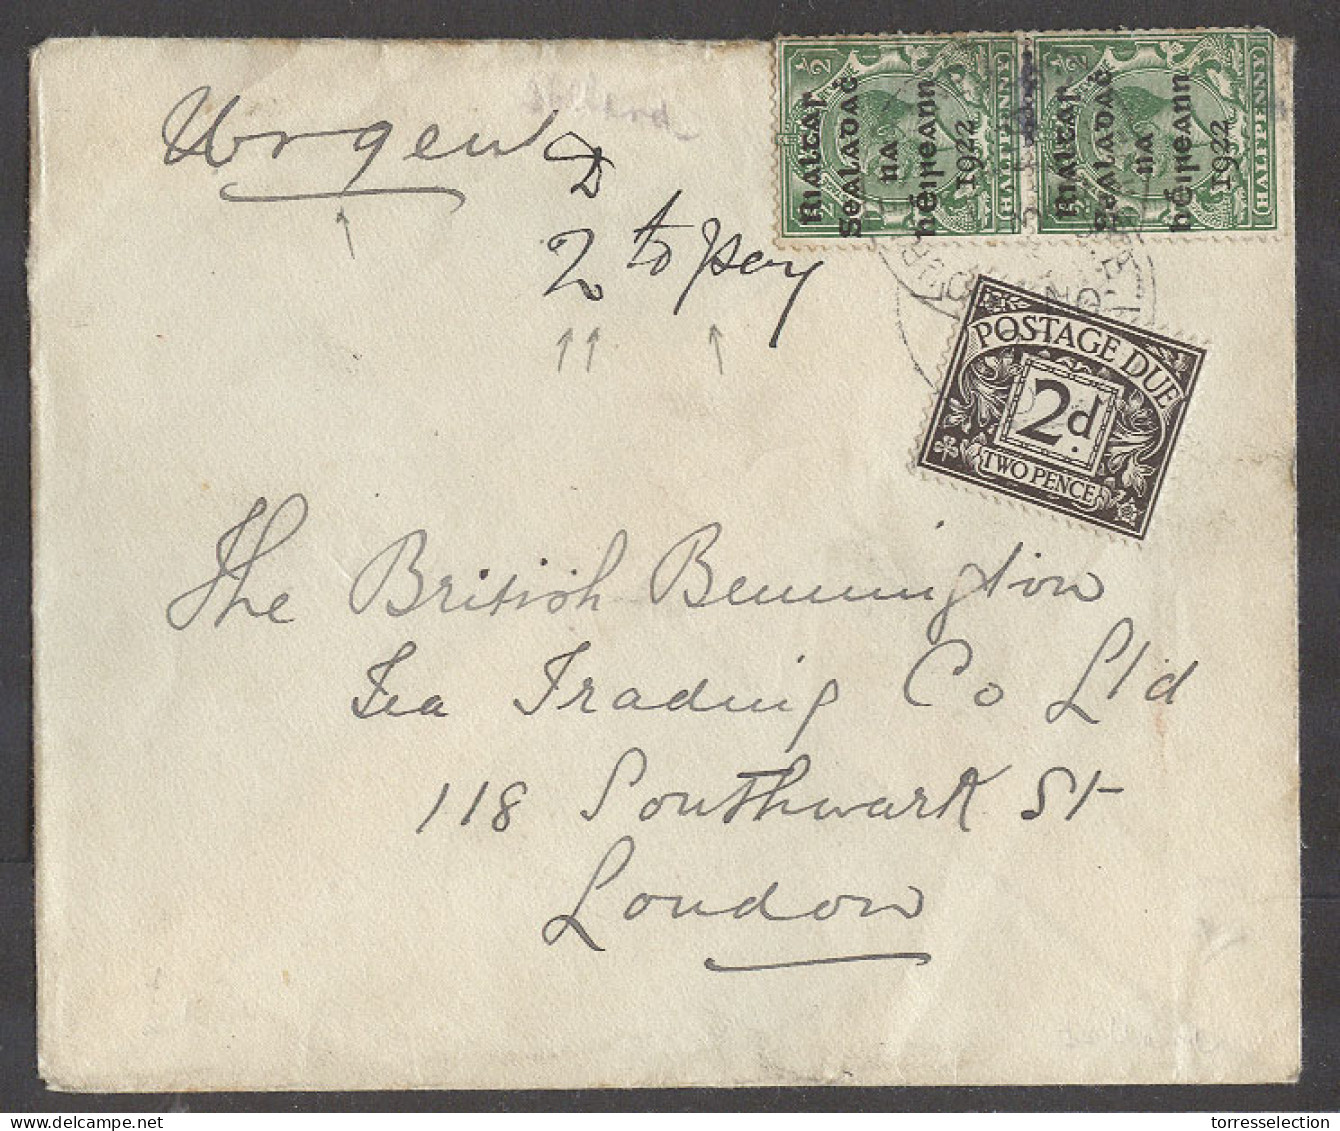 EIRE. 1922 (Oct). Fkd Env To London, UK With 1/2d Green Vert Pair Ovptd Issue Urgent Manuscript 2 To Pay GB 2d Tied Post - Usados